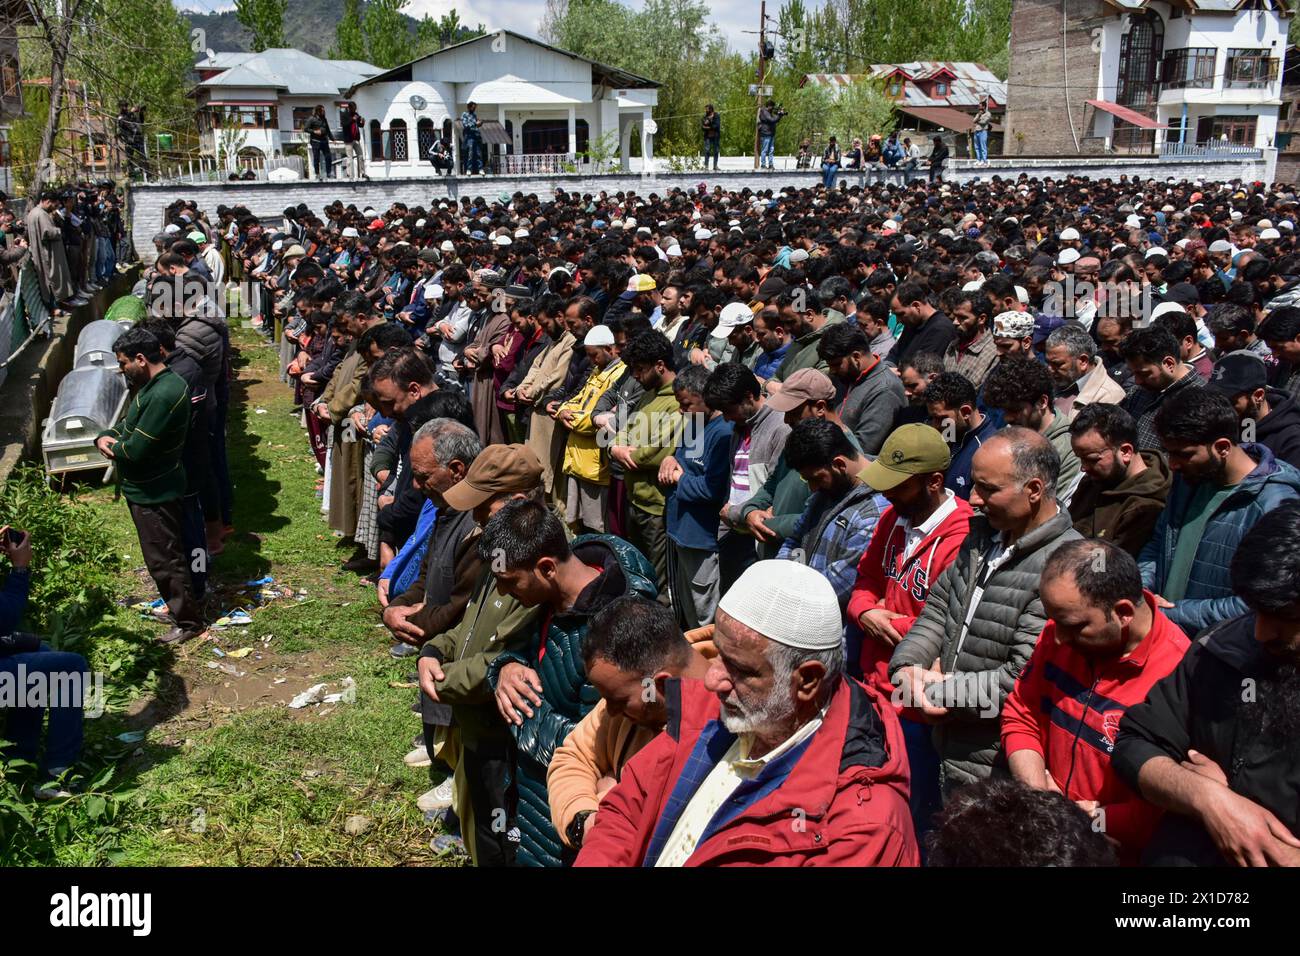 Relatives and residents offer funeral prayers of victims who died after a boat capsized in Jhelum river on the outskirts of Srinagar. A boat carrying a group of people has capsized in a river, drowning six of them. Most of the passengers were children on their way to school, and rescuers are searching for the missing. Stock Photo